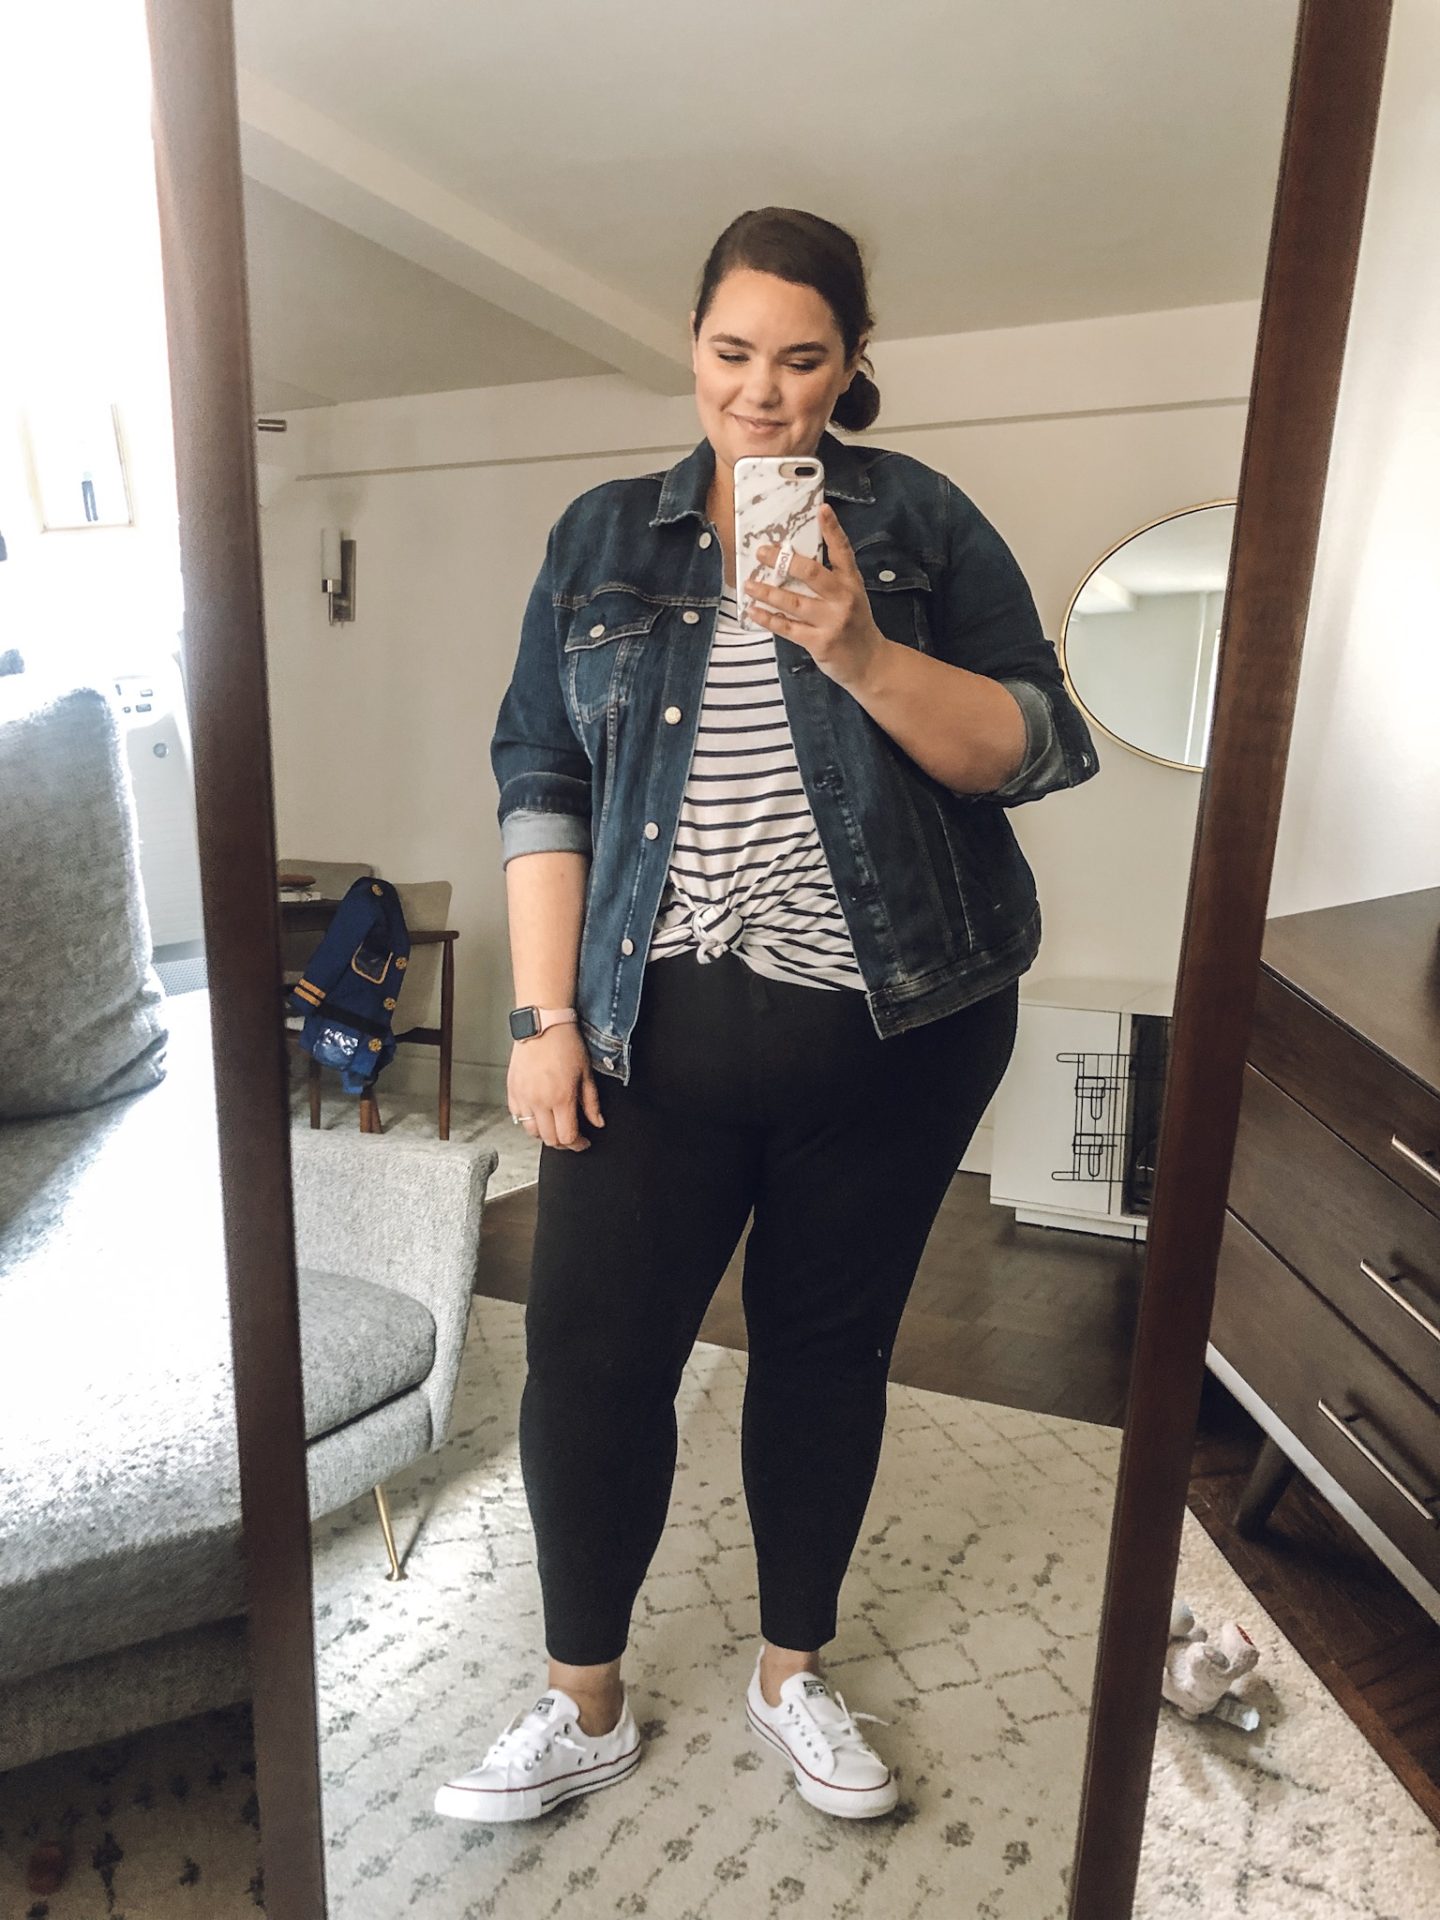 HOW TO STYLE A DENIM JACKET - PLUS SIZE